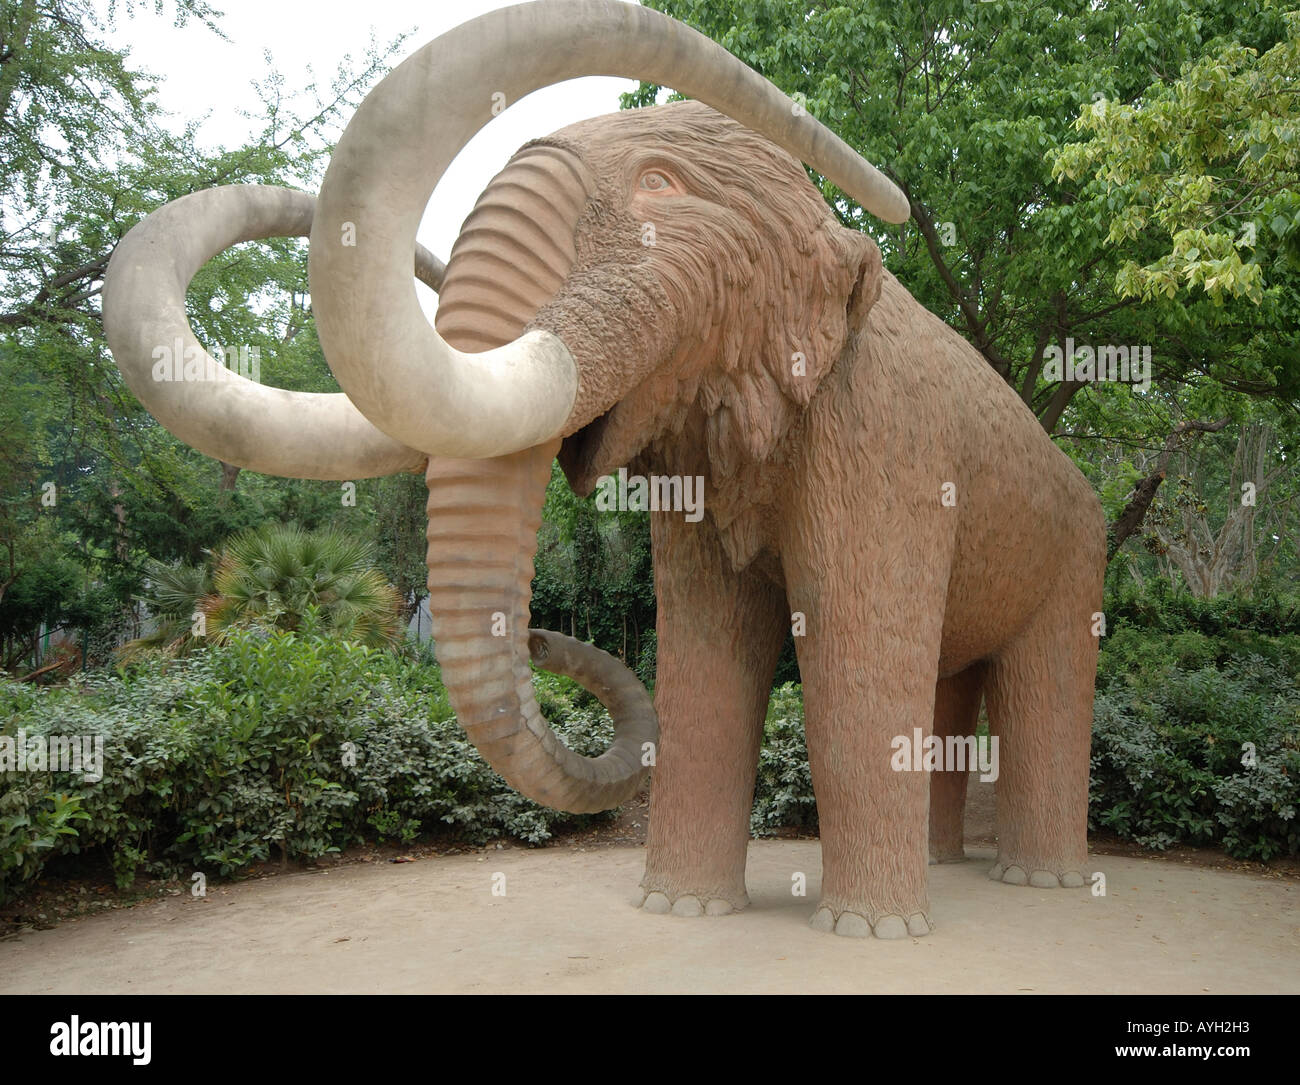 Sculpture of a mammoth in a Barcelona park. Stock Photo